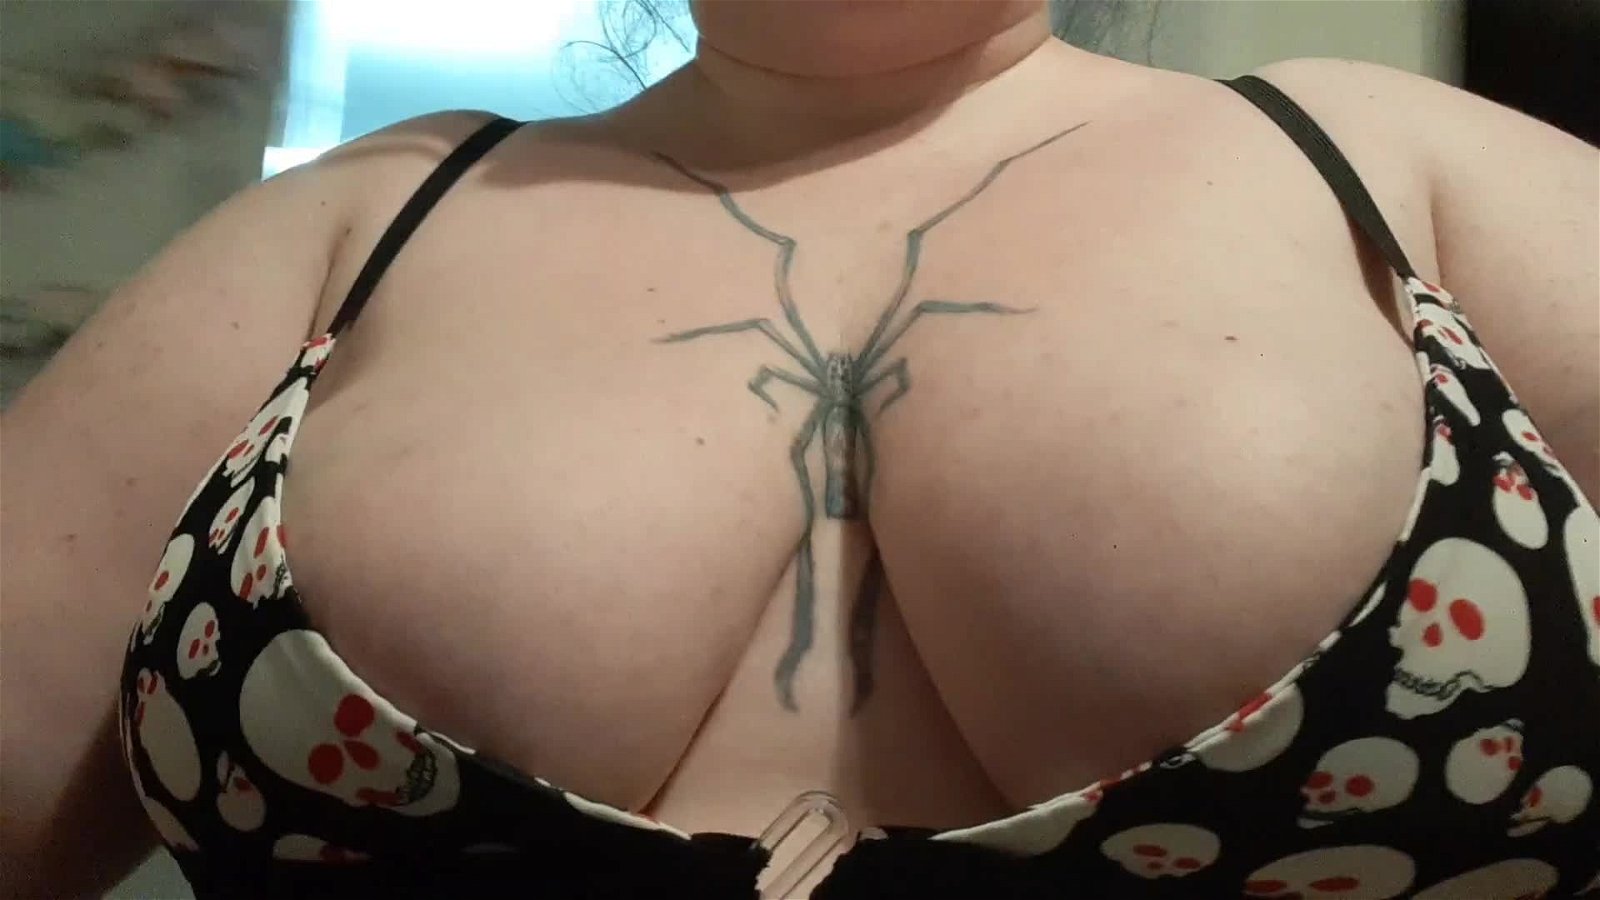 Video post by spiderboobs